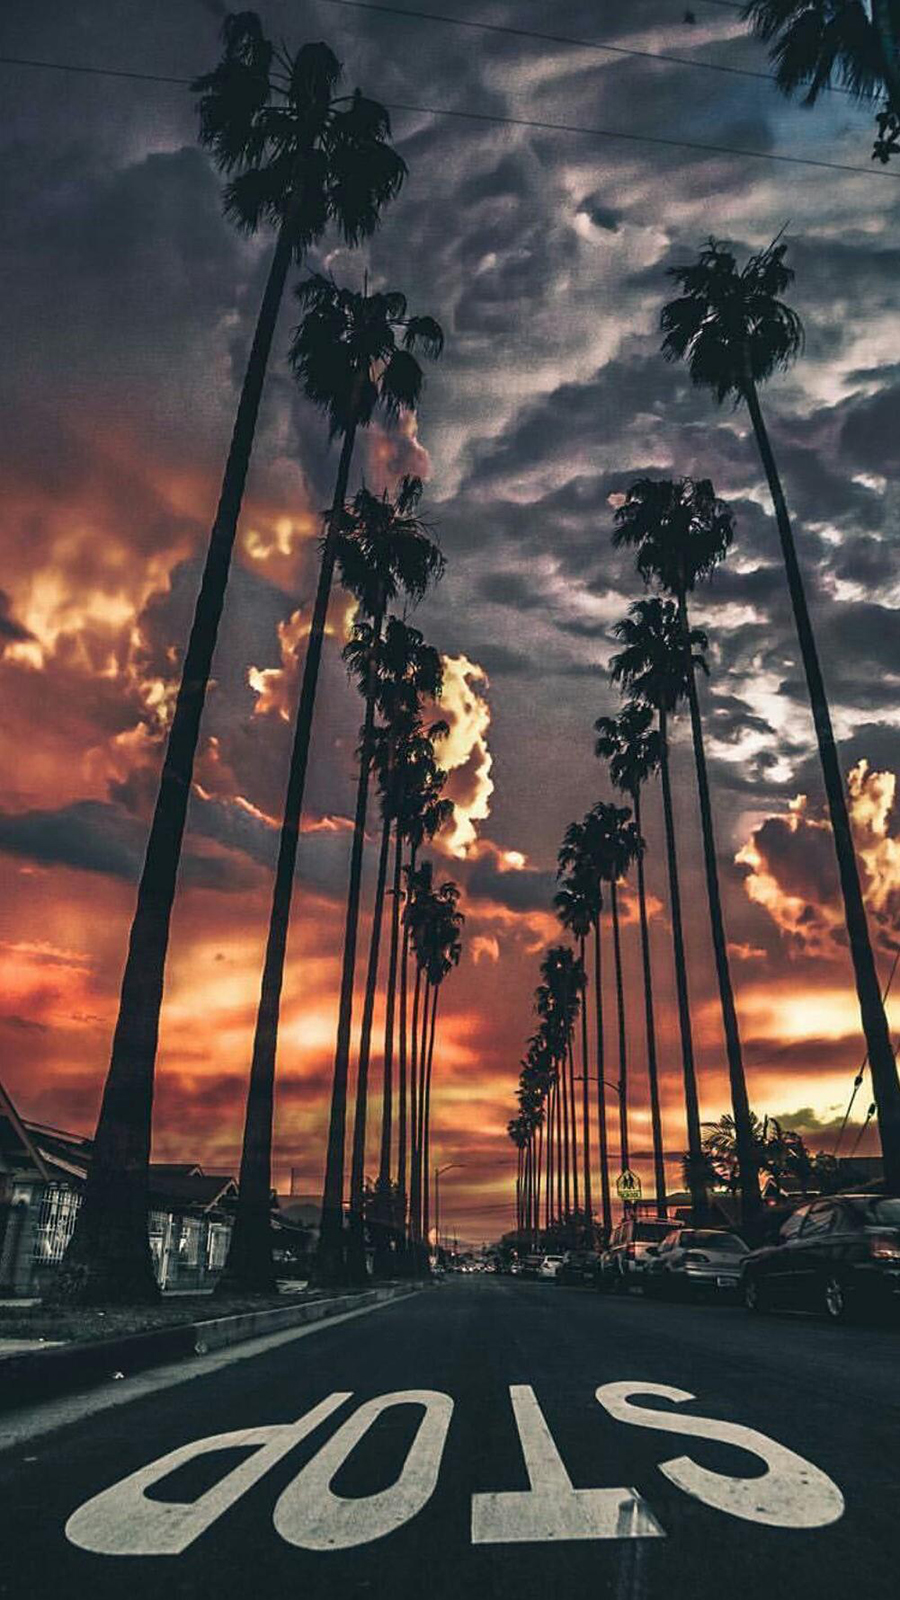 California Sunset Wallpaper – California Wallpapers Free Download For Phone and iPhone